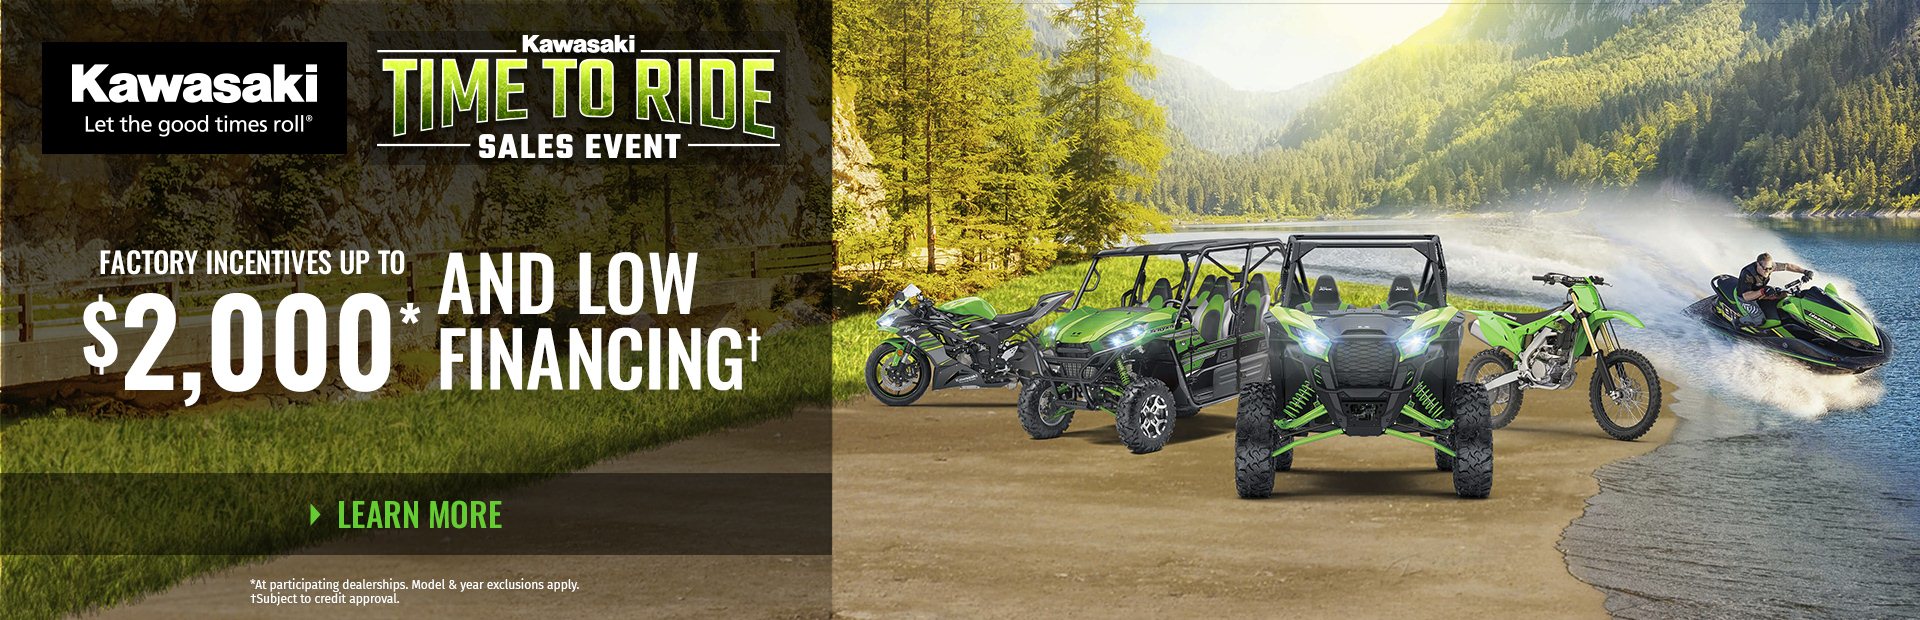 Time To Ride Sales Event at Sloans Motorcycle ATV, Murfreesboro, TN, 37129